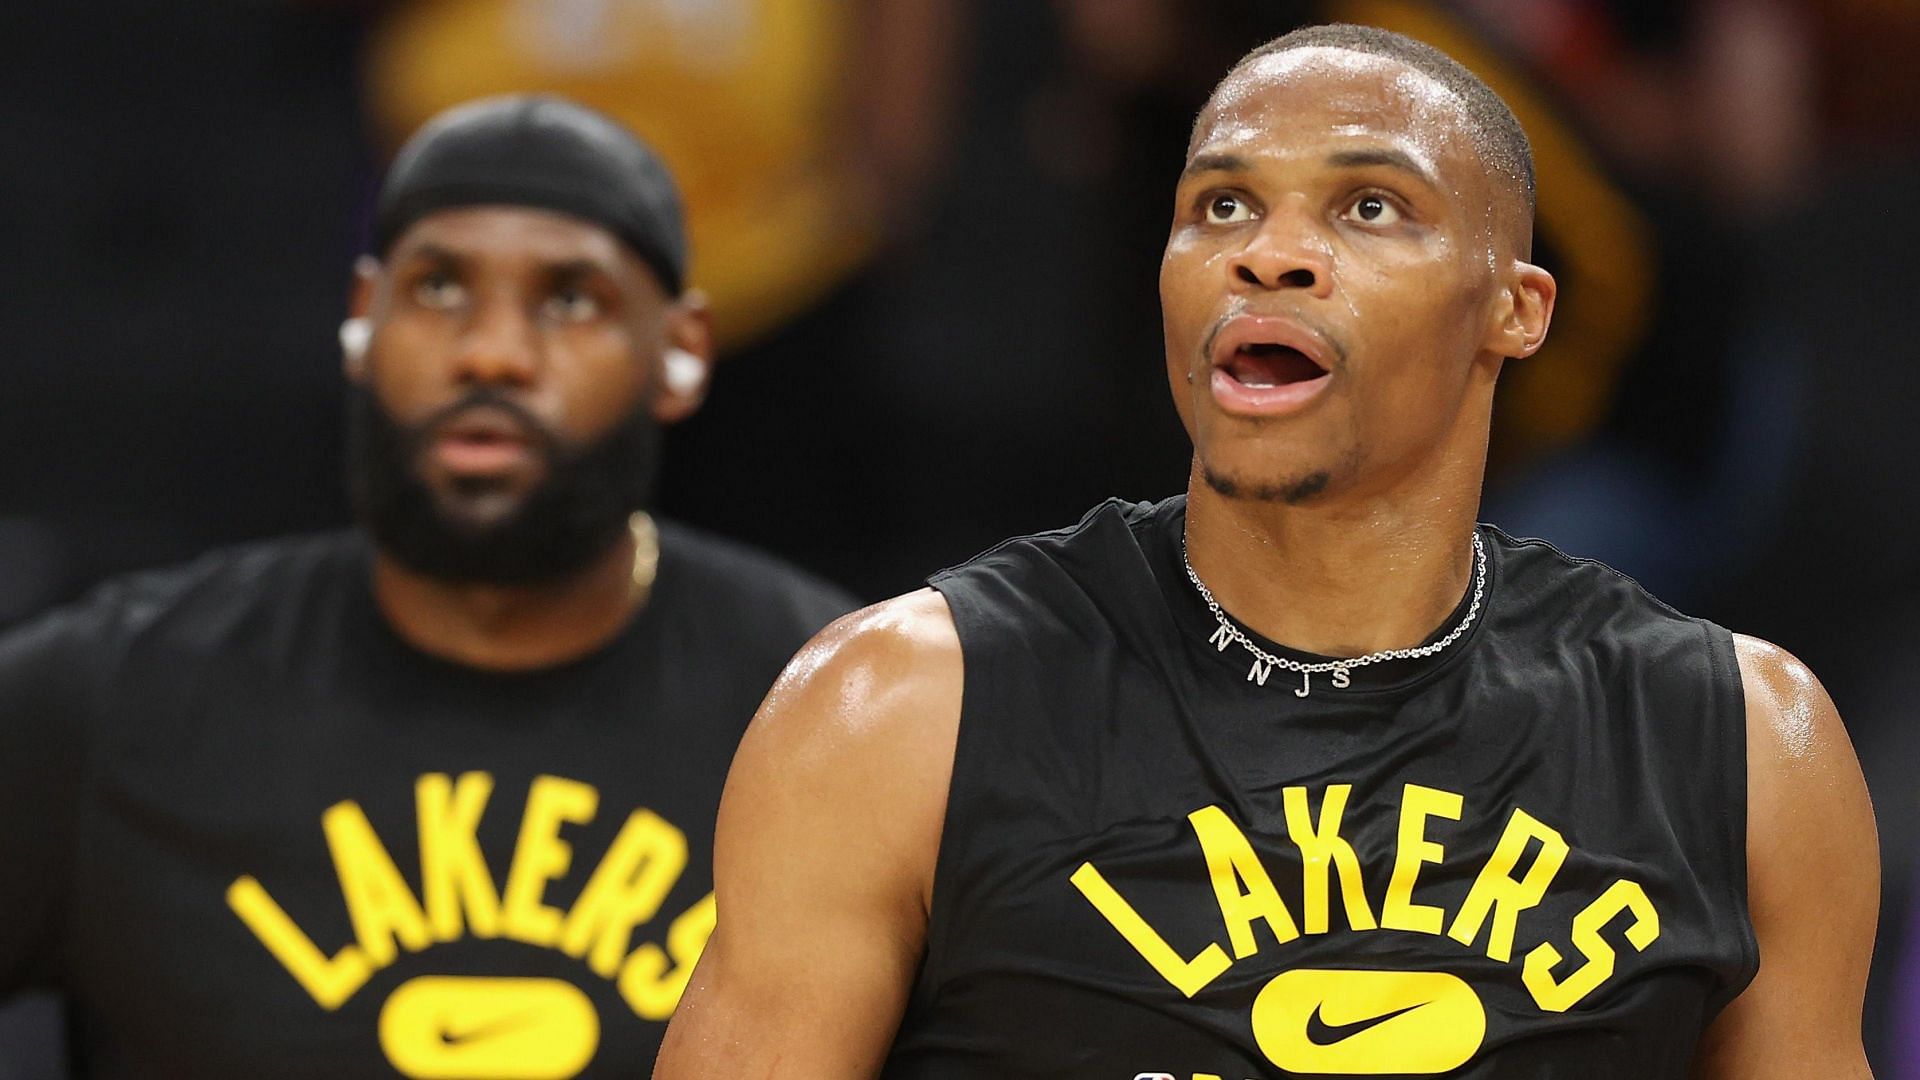 LeBron James and Russell Westbrook have to find better chemistry to carry the LA Lakers to the playoffs. [Photo: Forbes]